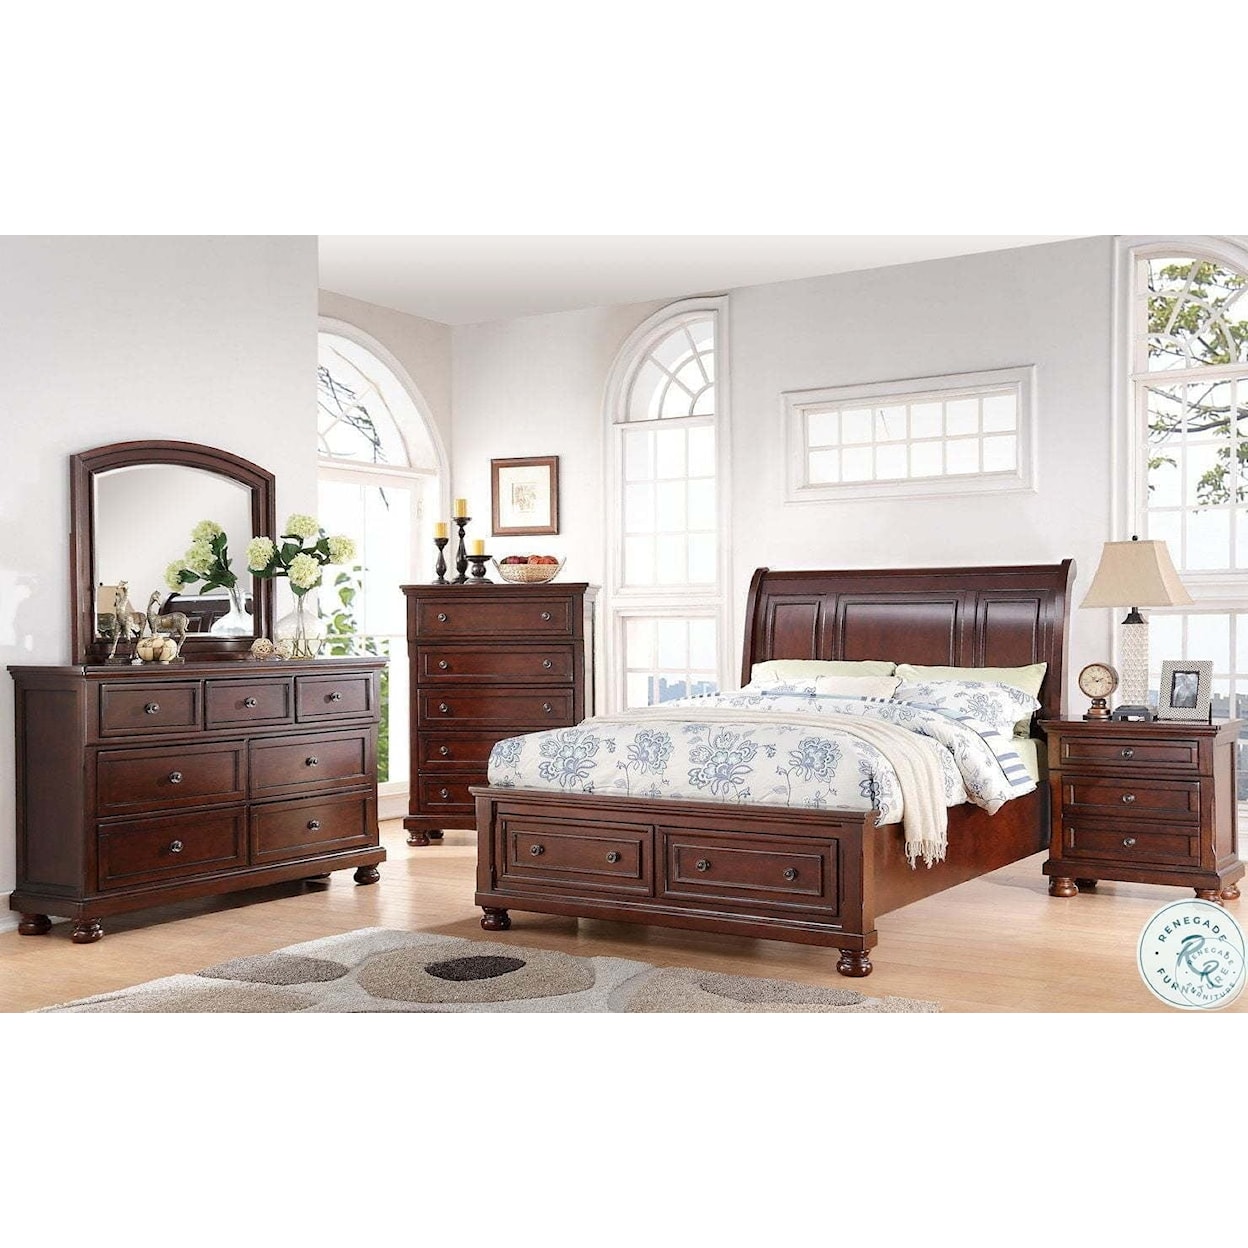 Avalon Furniture Stella B0961 Cherry Queen 7pc Bedroom group